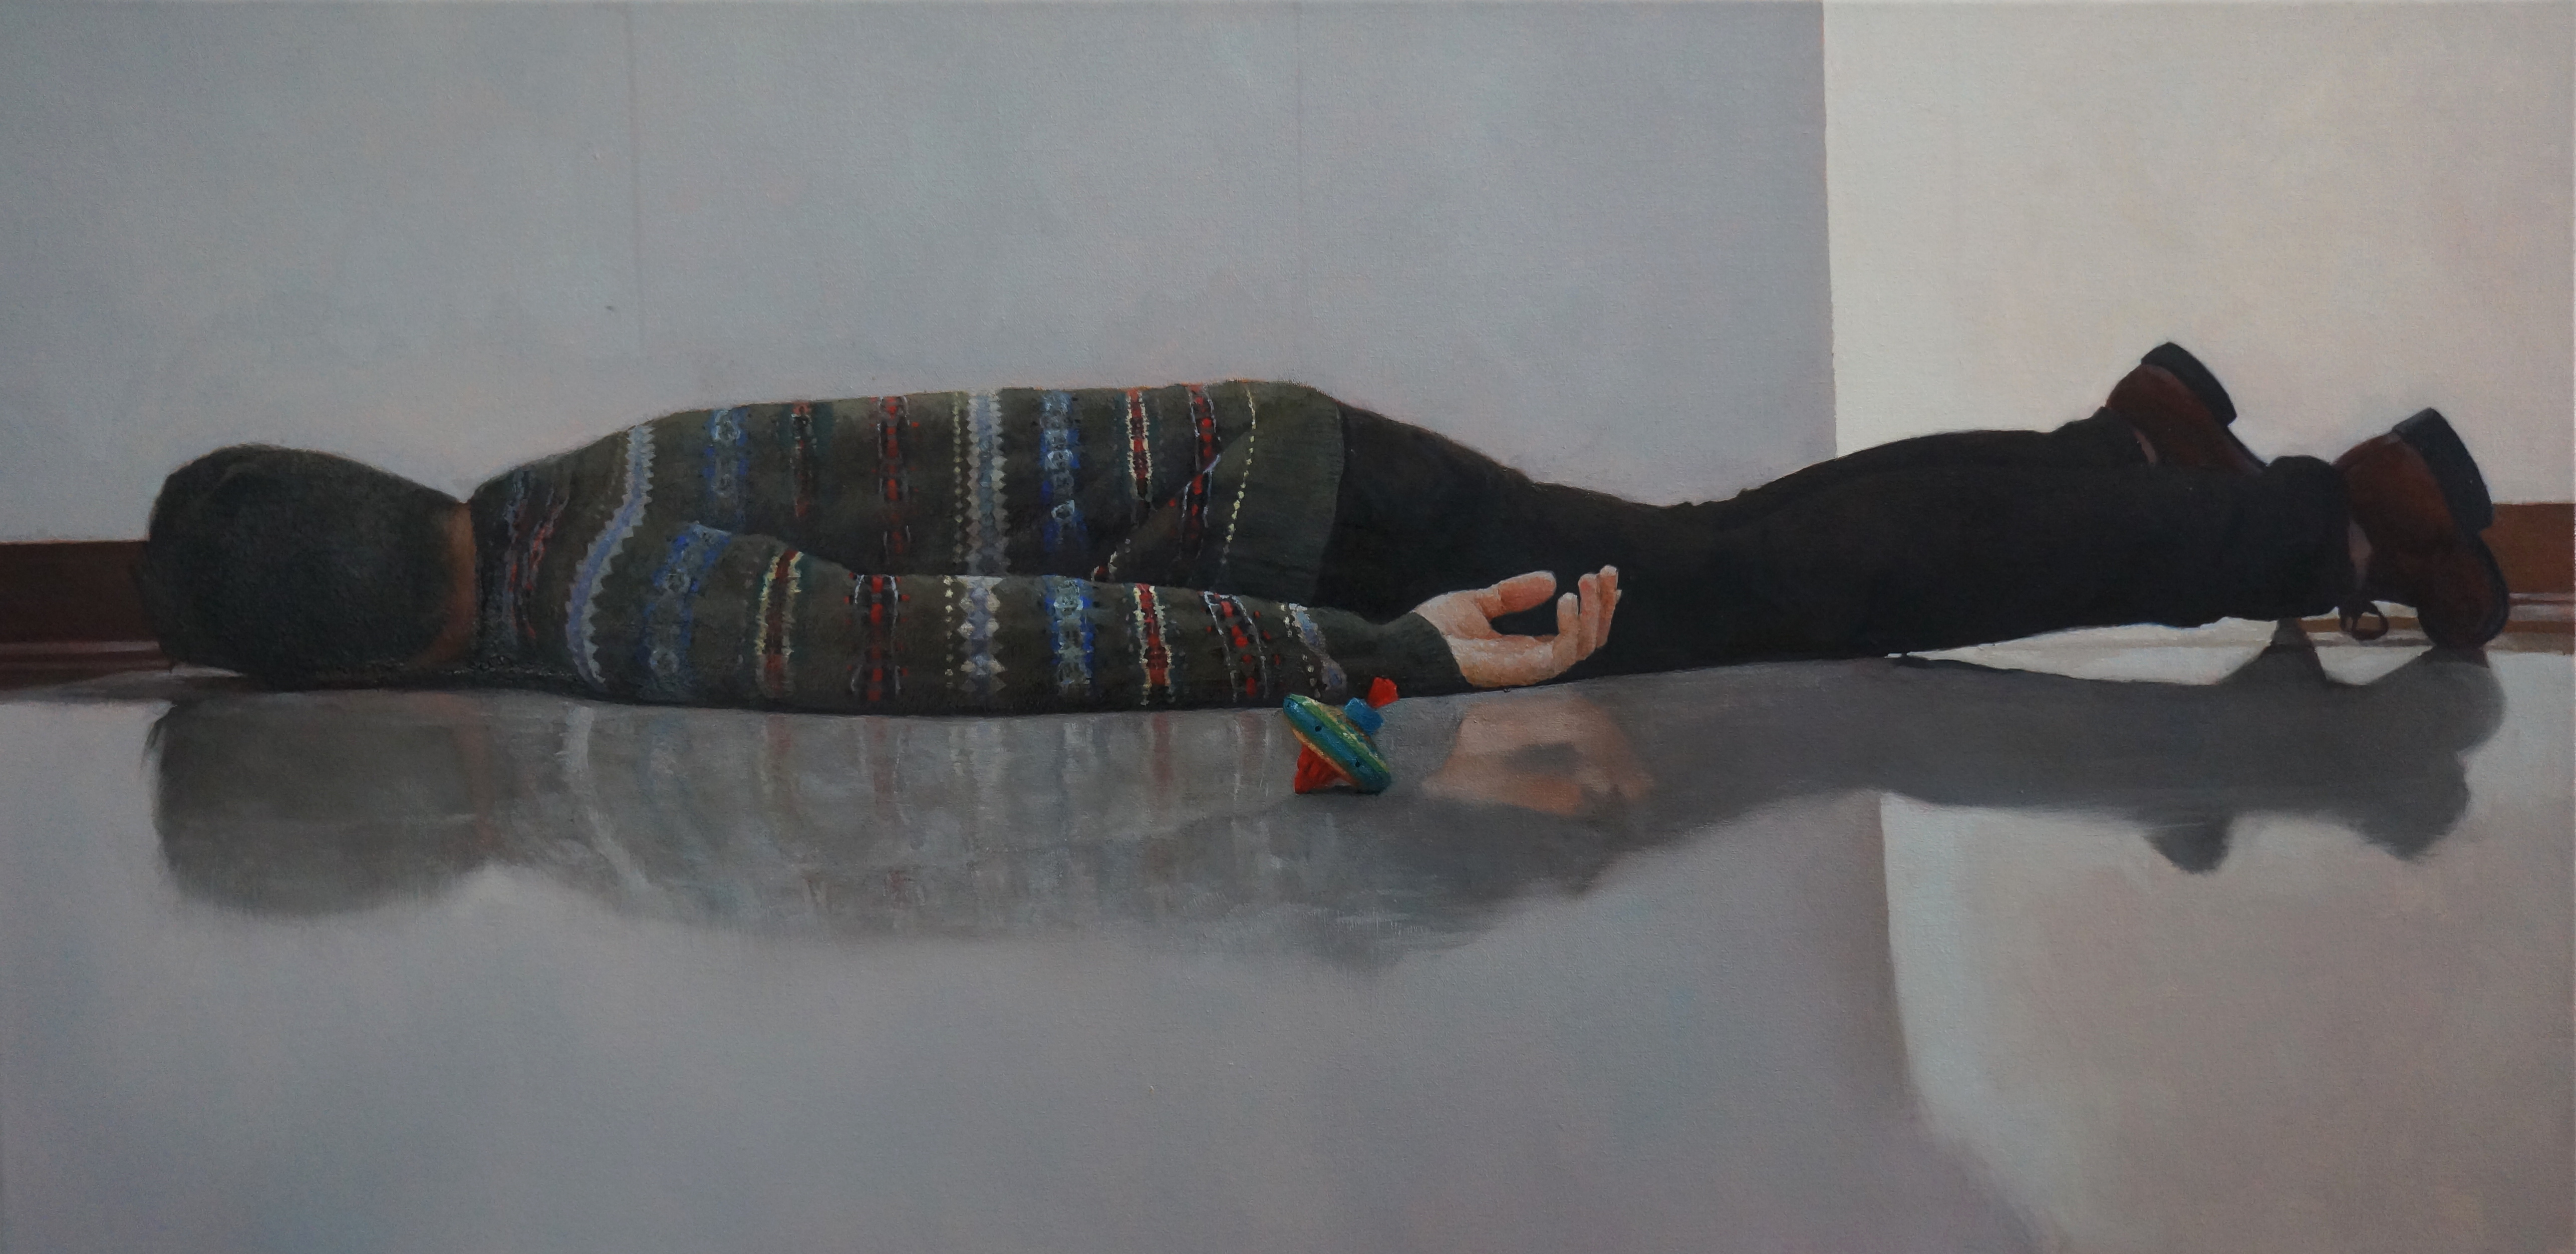 Oil on canvas, 2015, 24 x 48 inches.